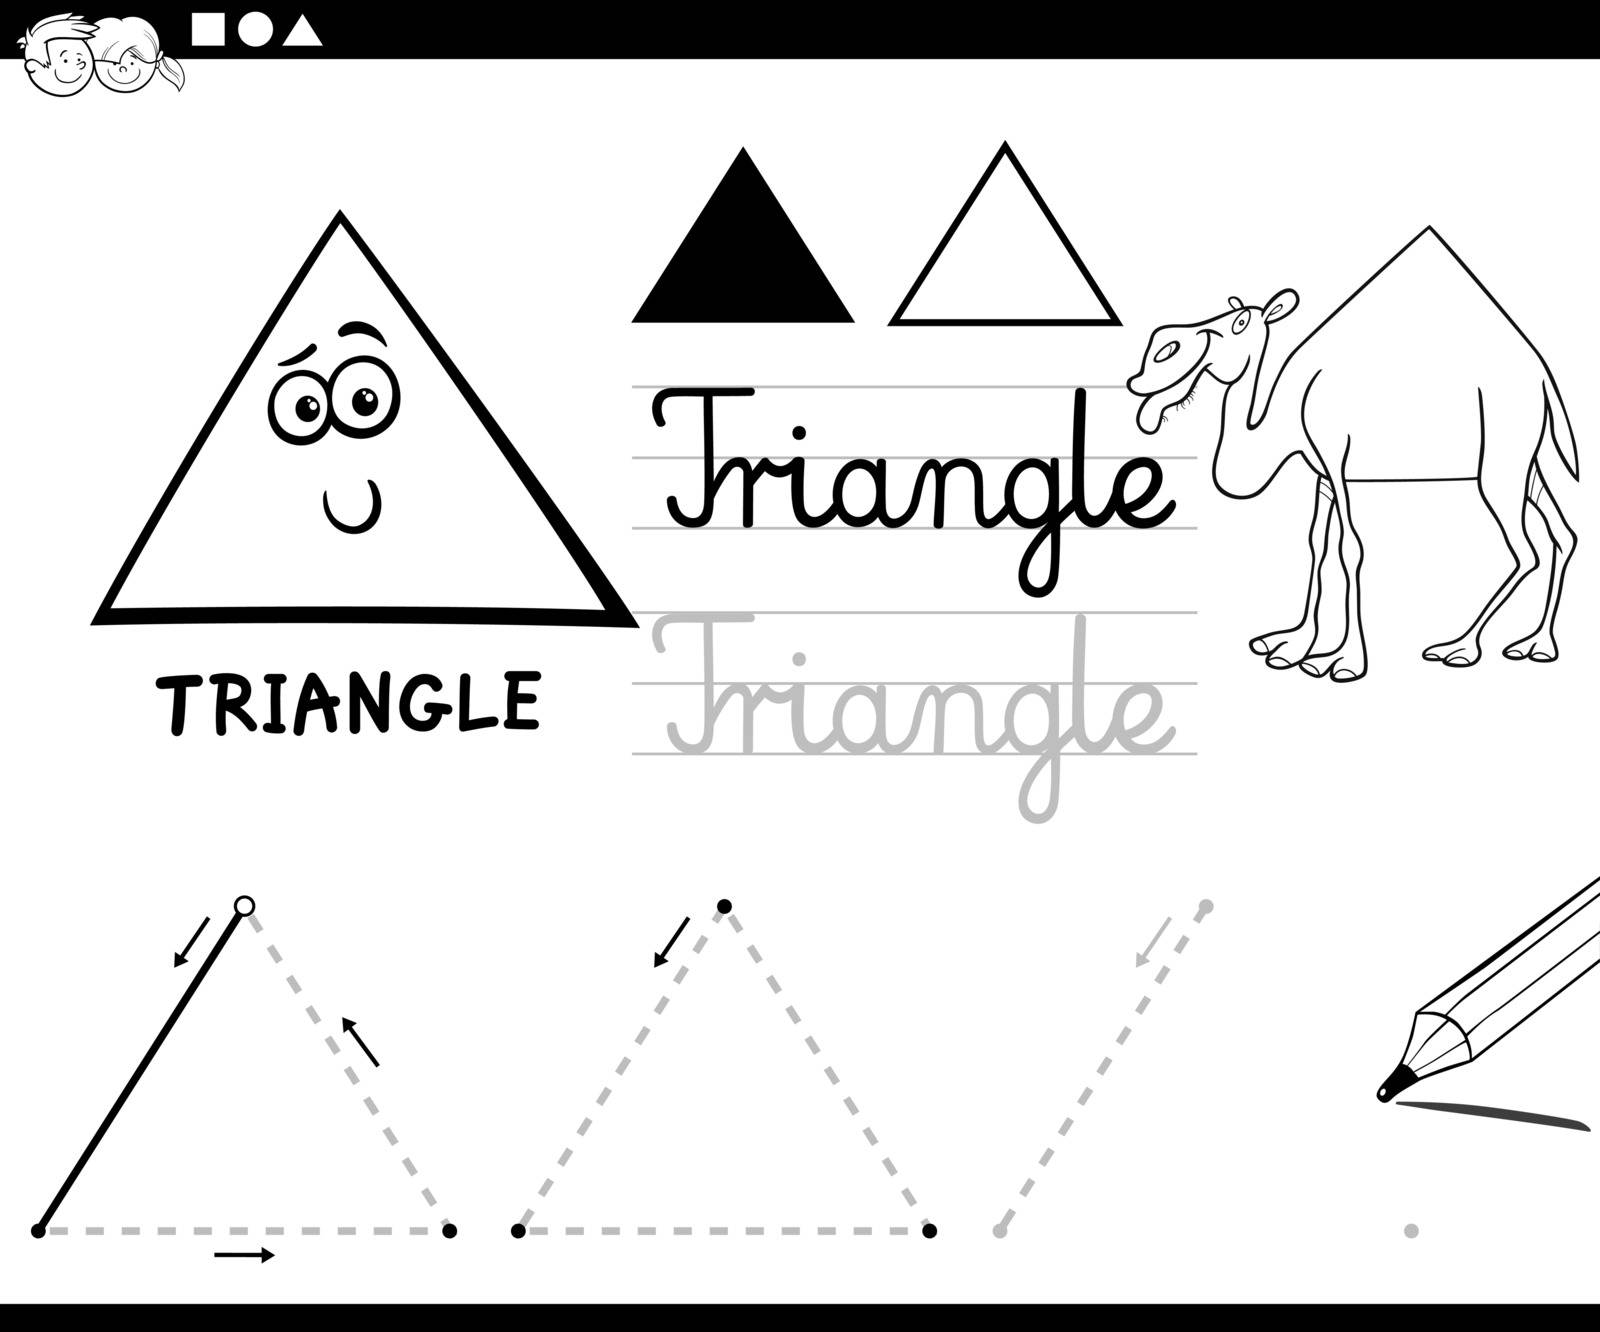 Black and White Educational Cartoon Illustration of Triangle Basic Geometric Shape for Children Coloring Page